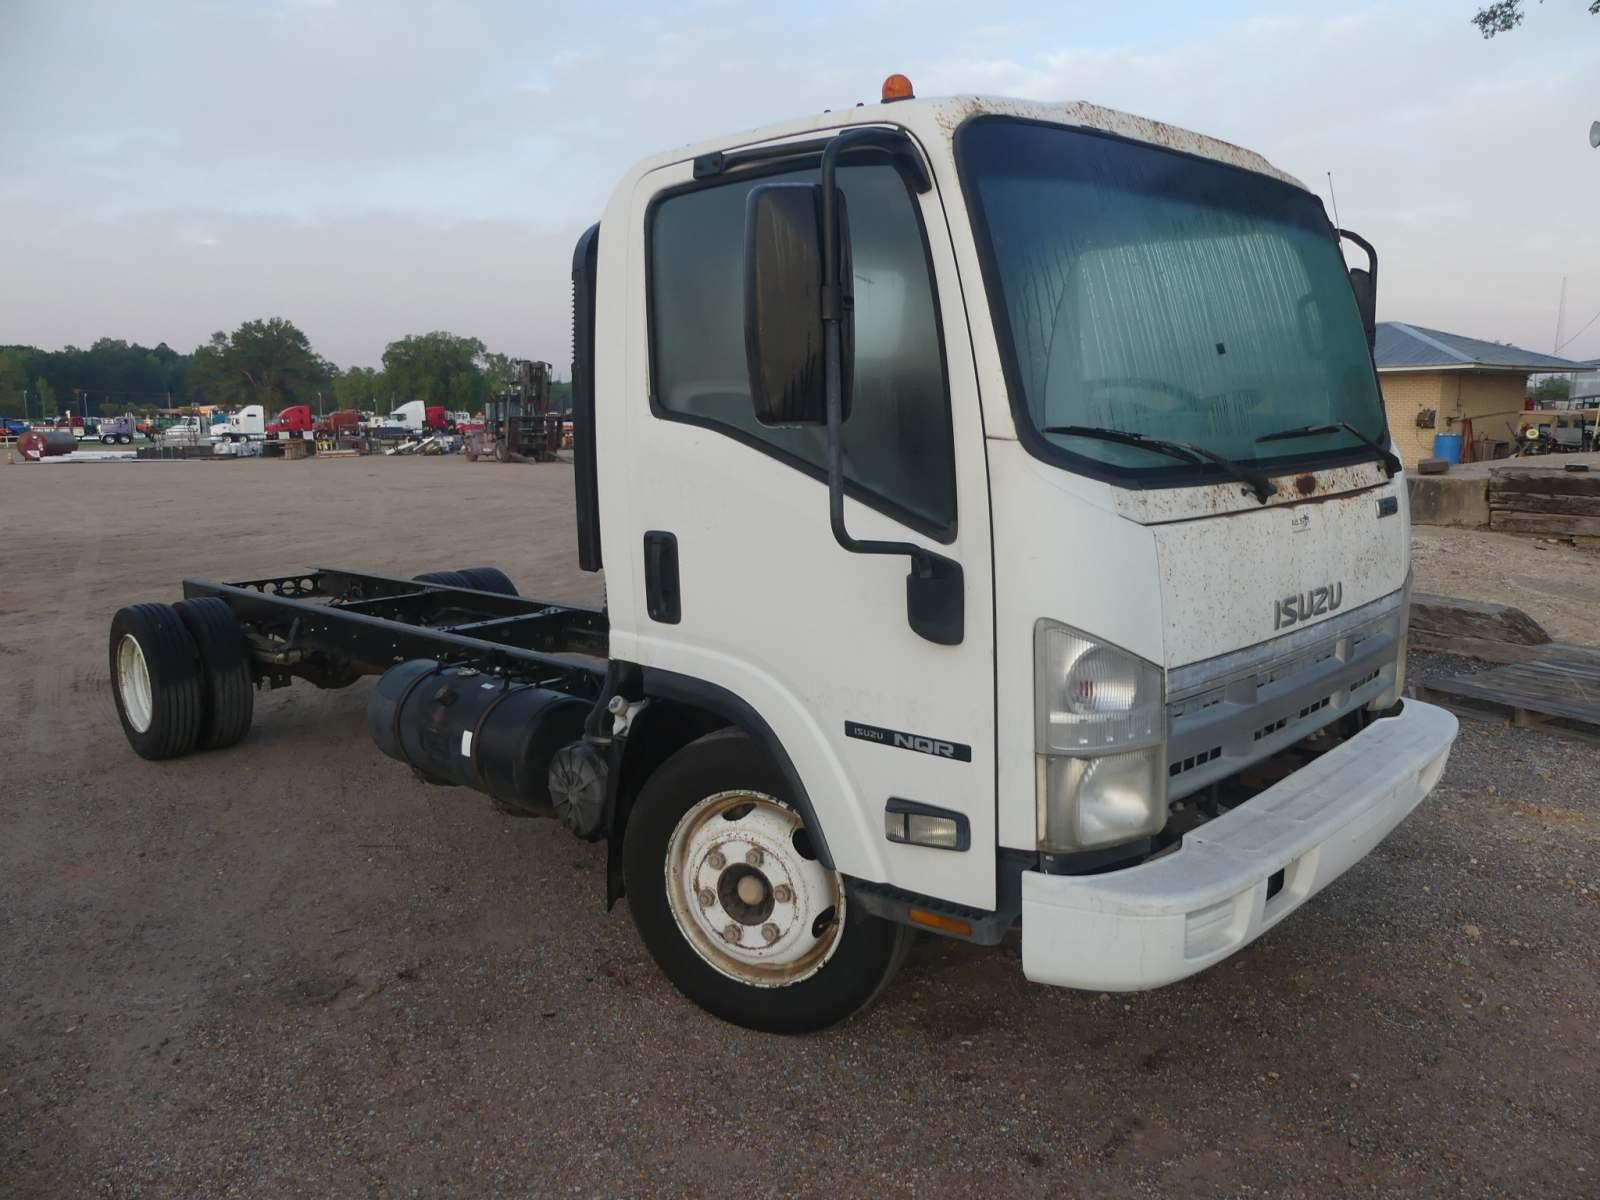 2008 Isuzu NQR Cab & Chassis Truck, s/n JALE5W16387900034: Cabover, Diesel